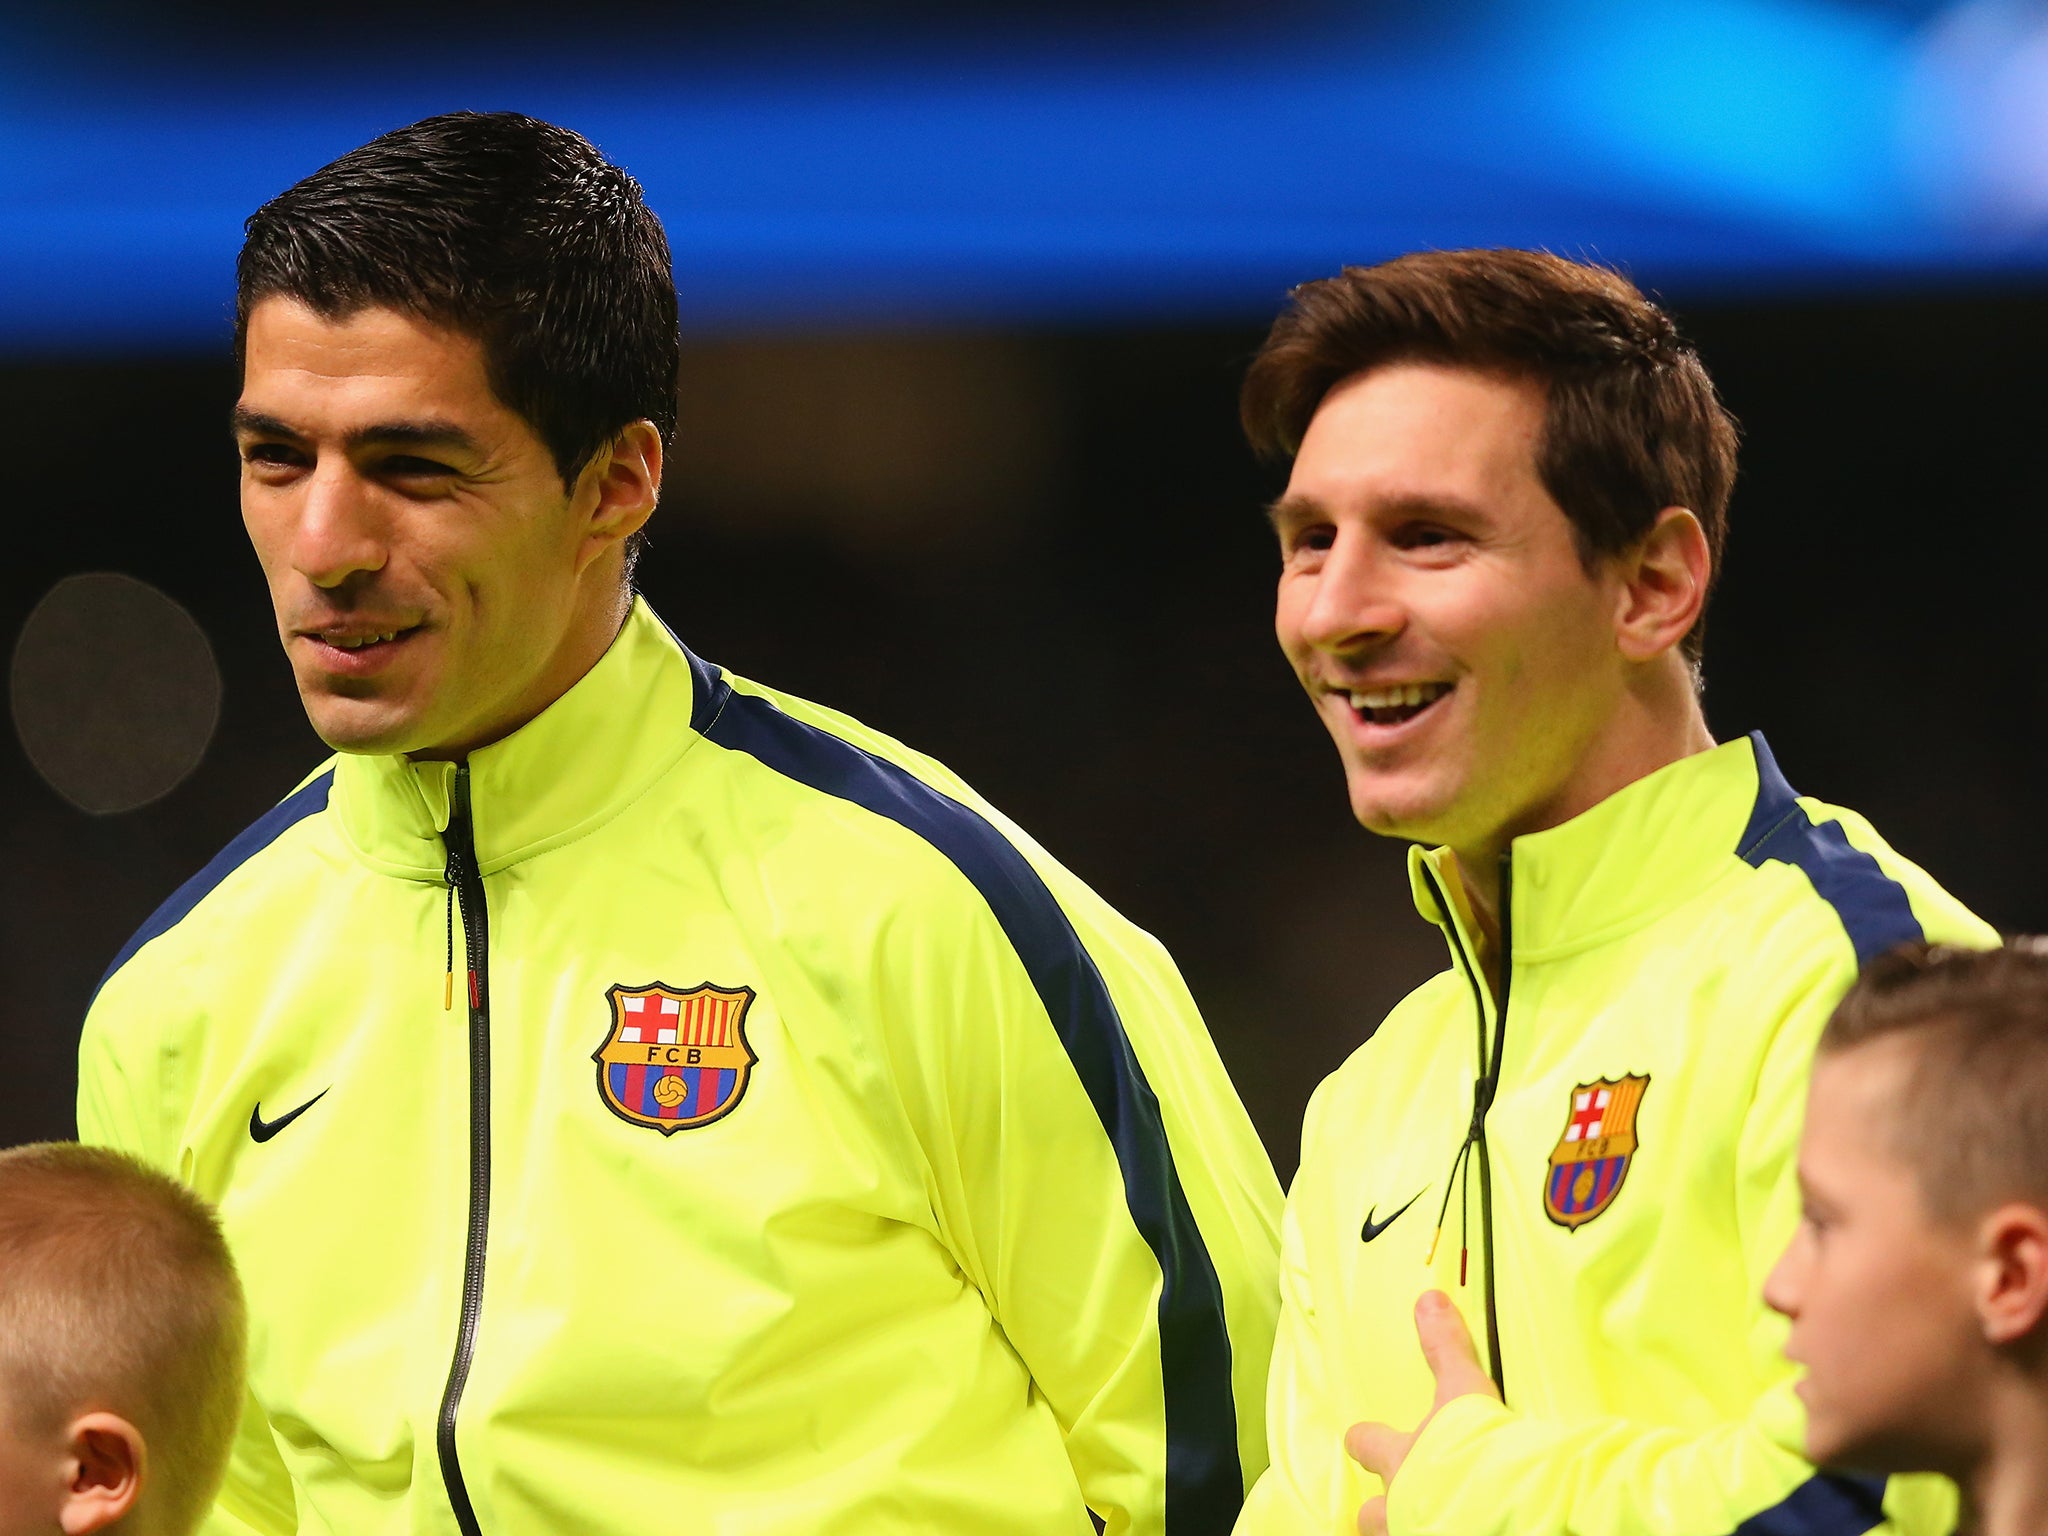 Luis Suarez and Lionel Messi ahead of their Champions League tie with Manchester City at the Etihad